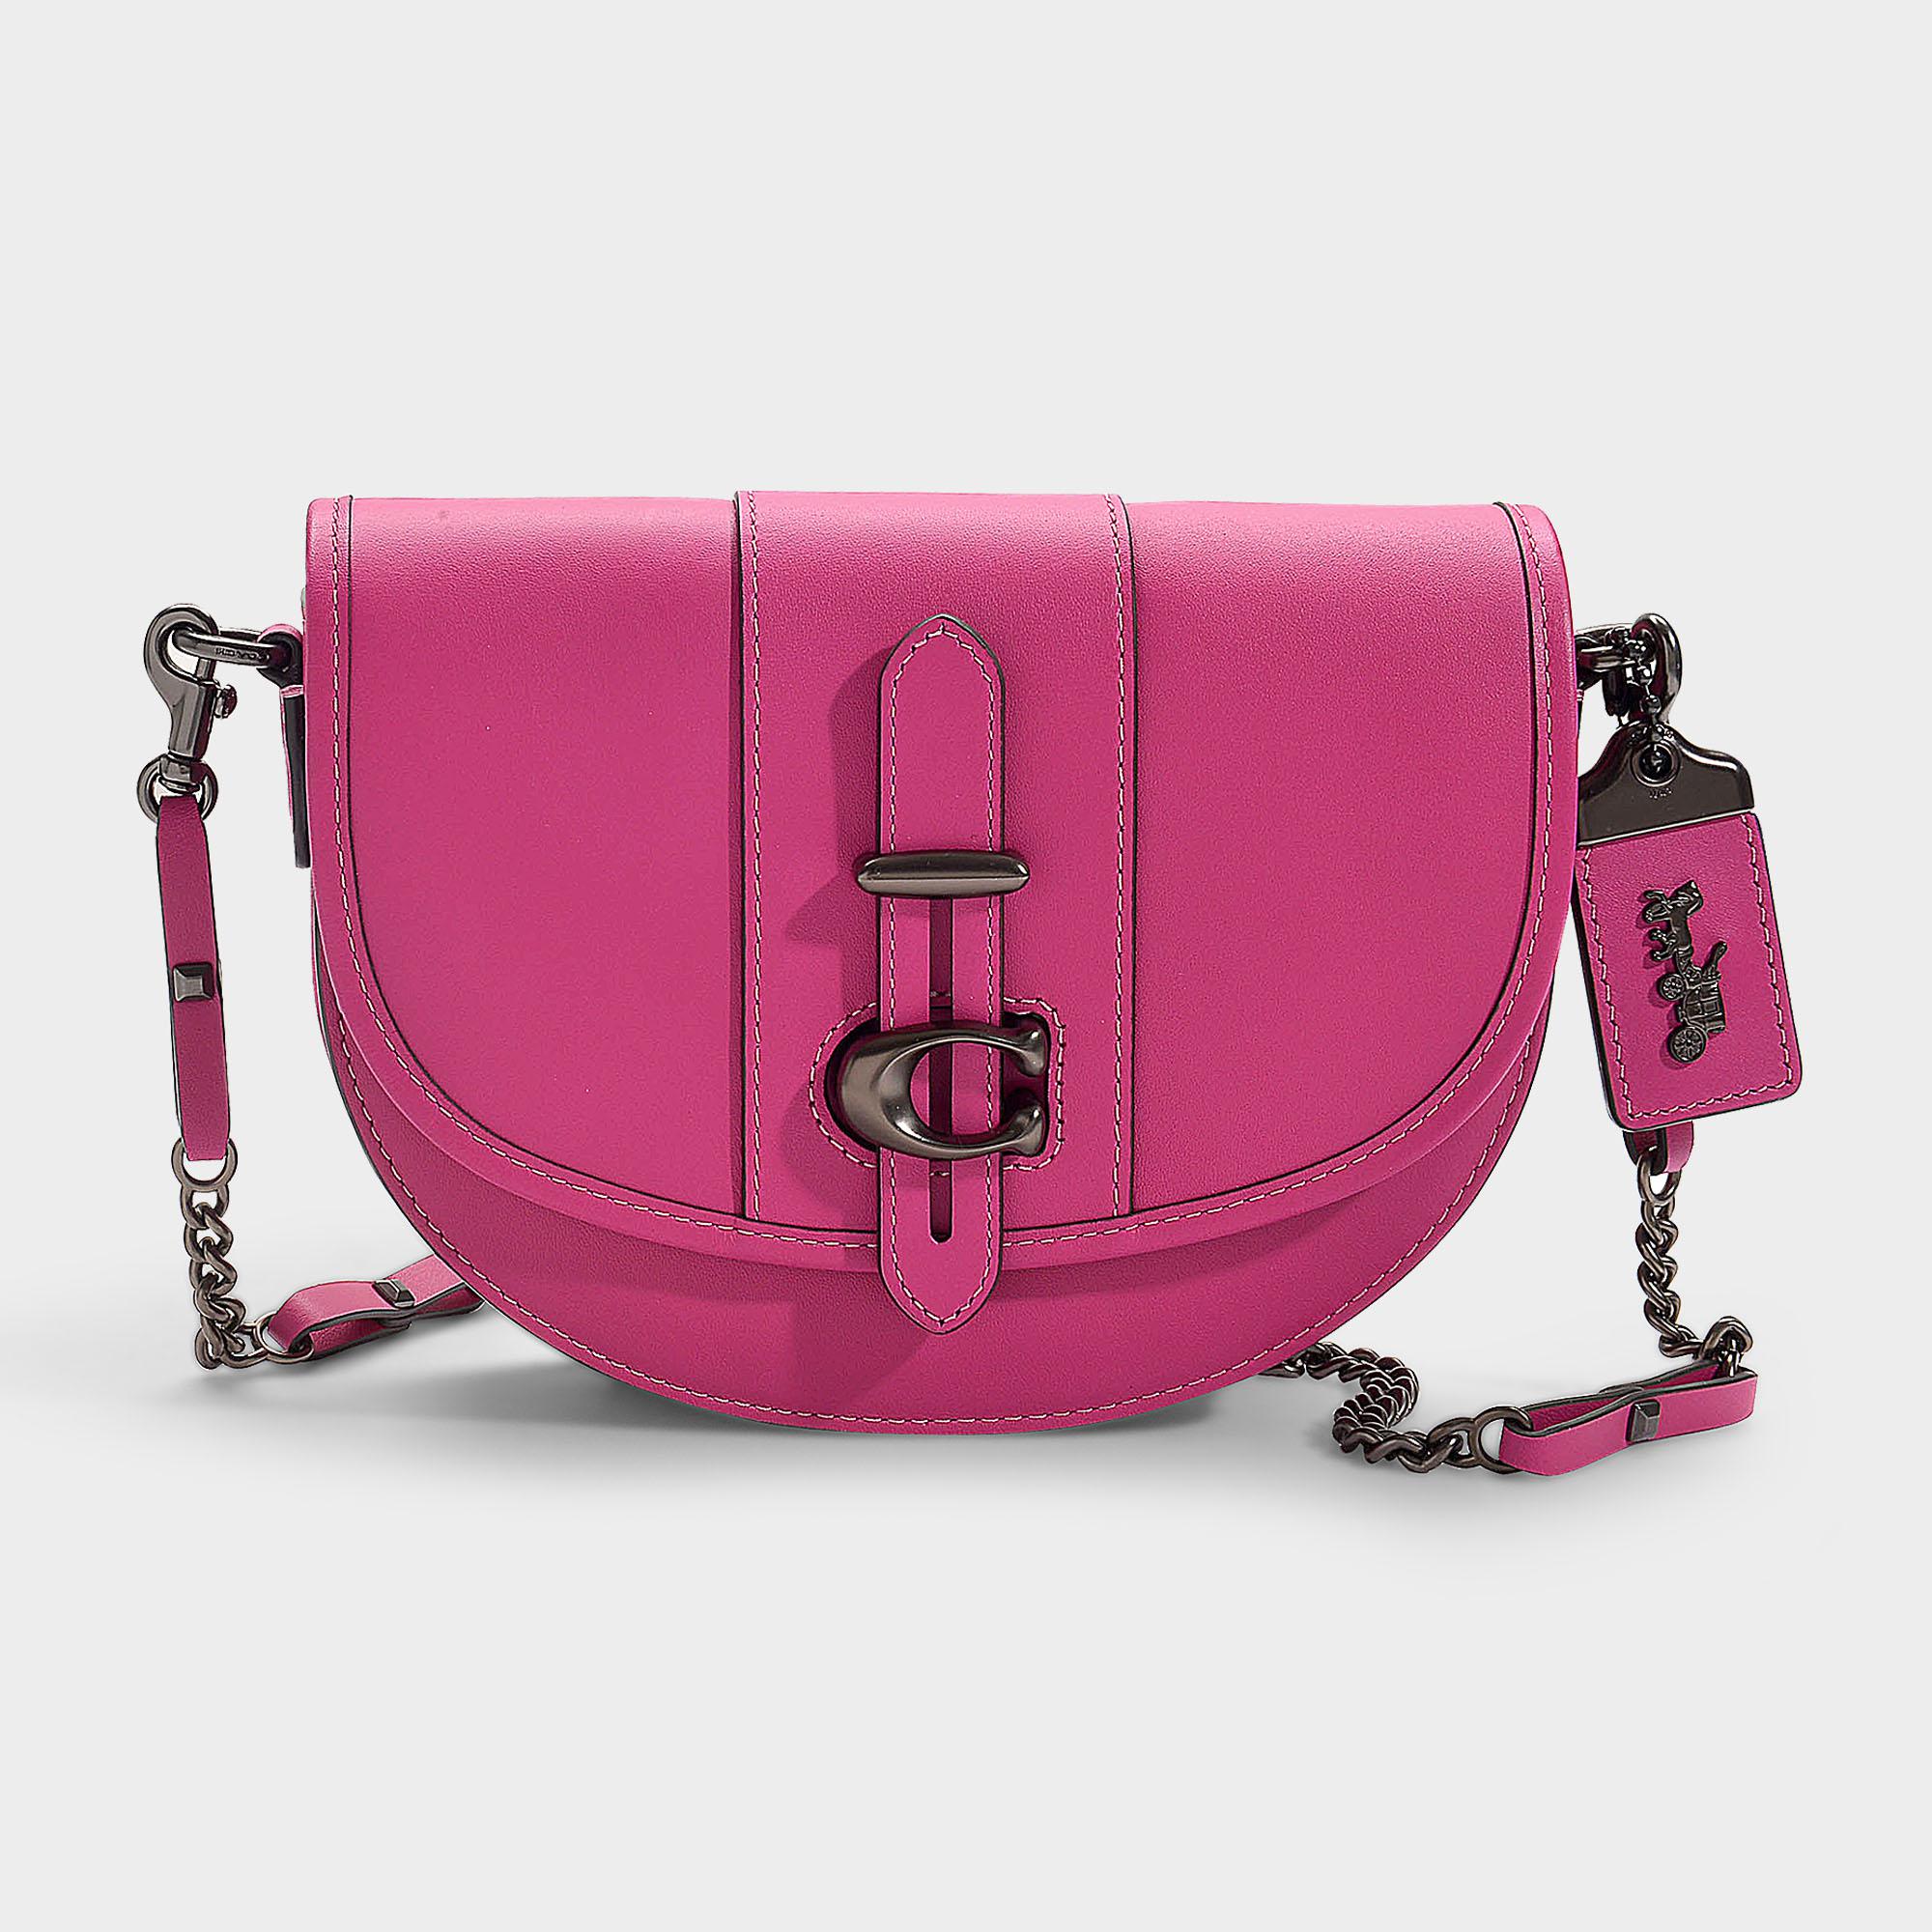 COACH Glovetanned Leather Saddle Bag in Pink - Save 58% - Lyst